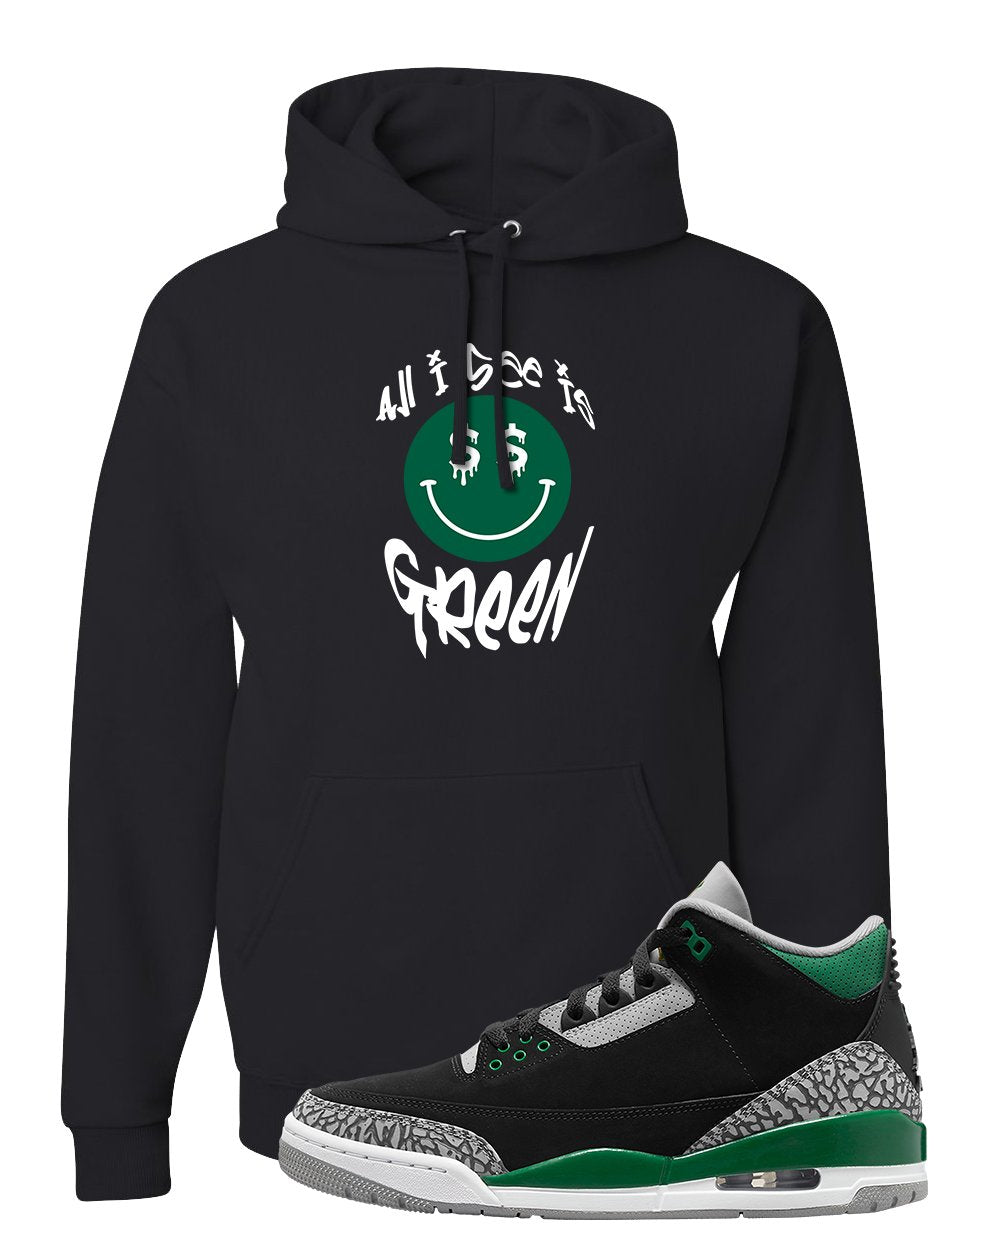 Pine Green 3s Hoodie | All I See Is Green, Black